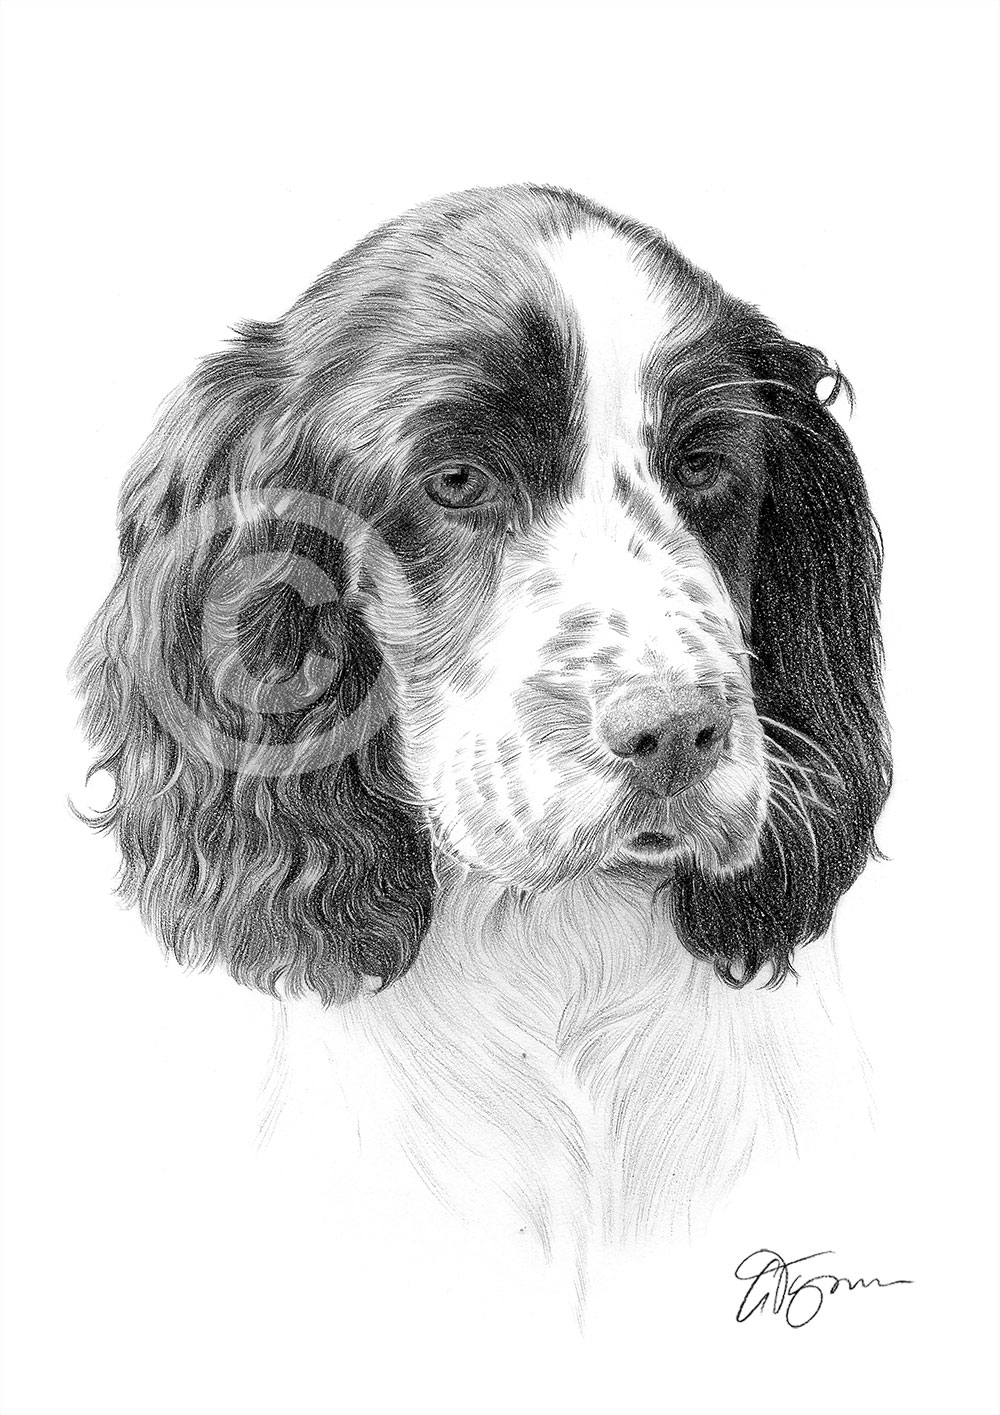 Pencil drawing of a springer spaniel by artist Gary Tymon